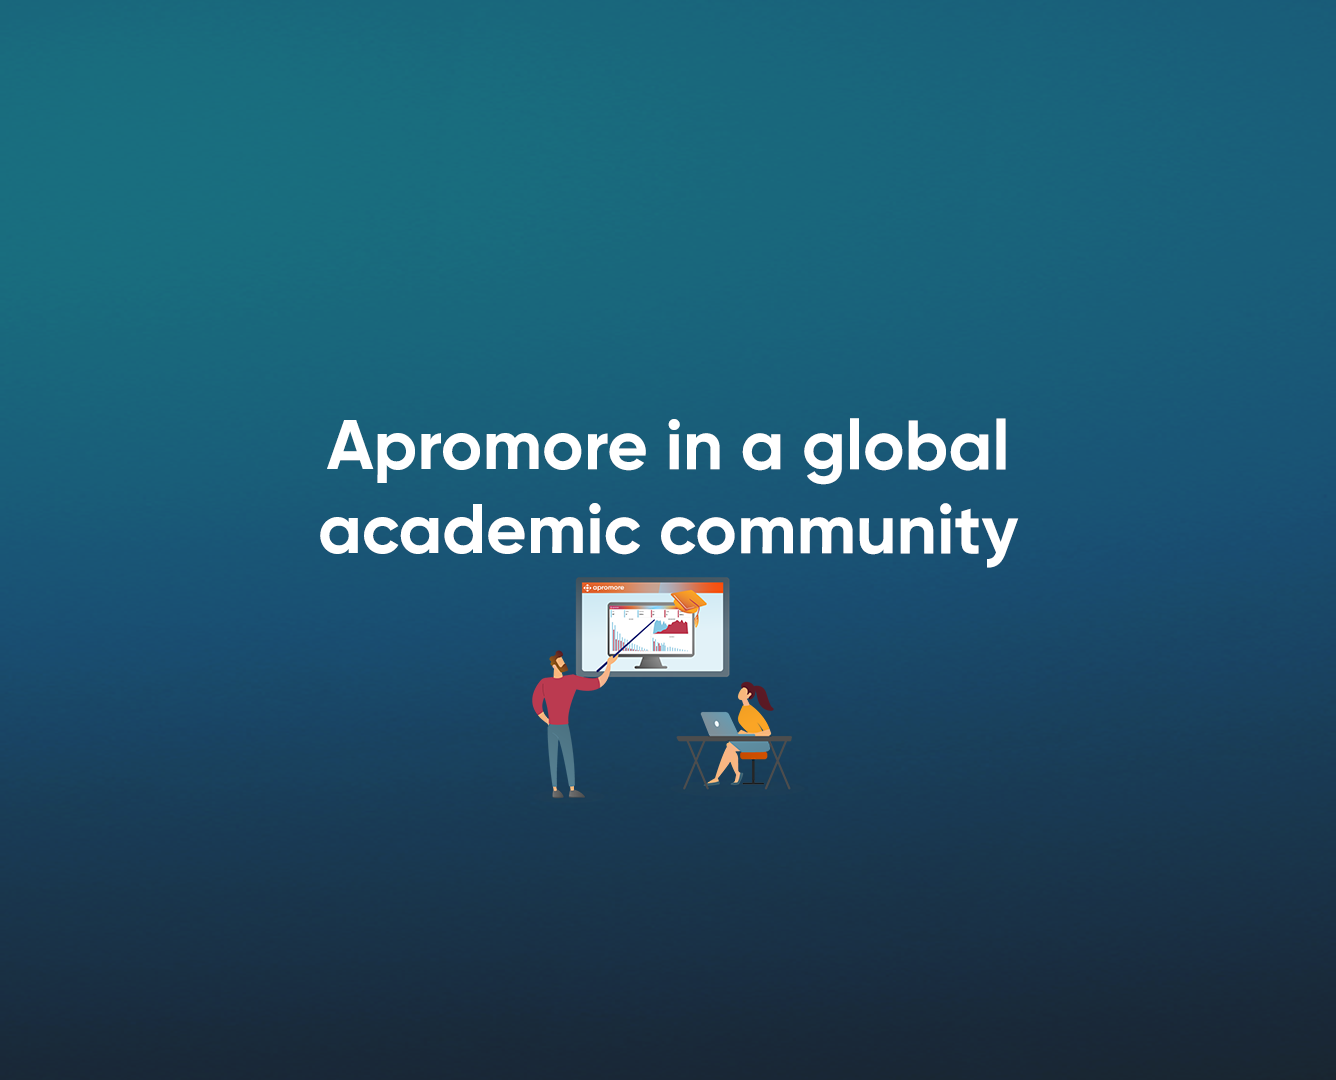 Apromore’s Strong Presence in the Worldwide Academic Community